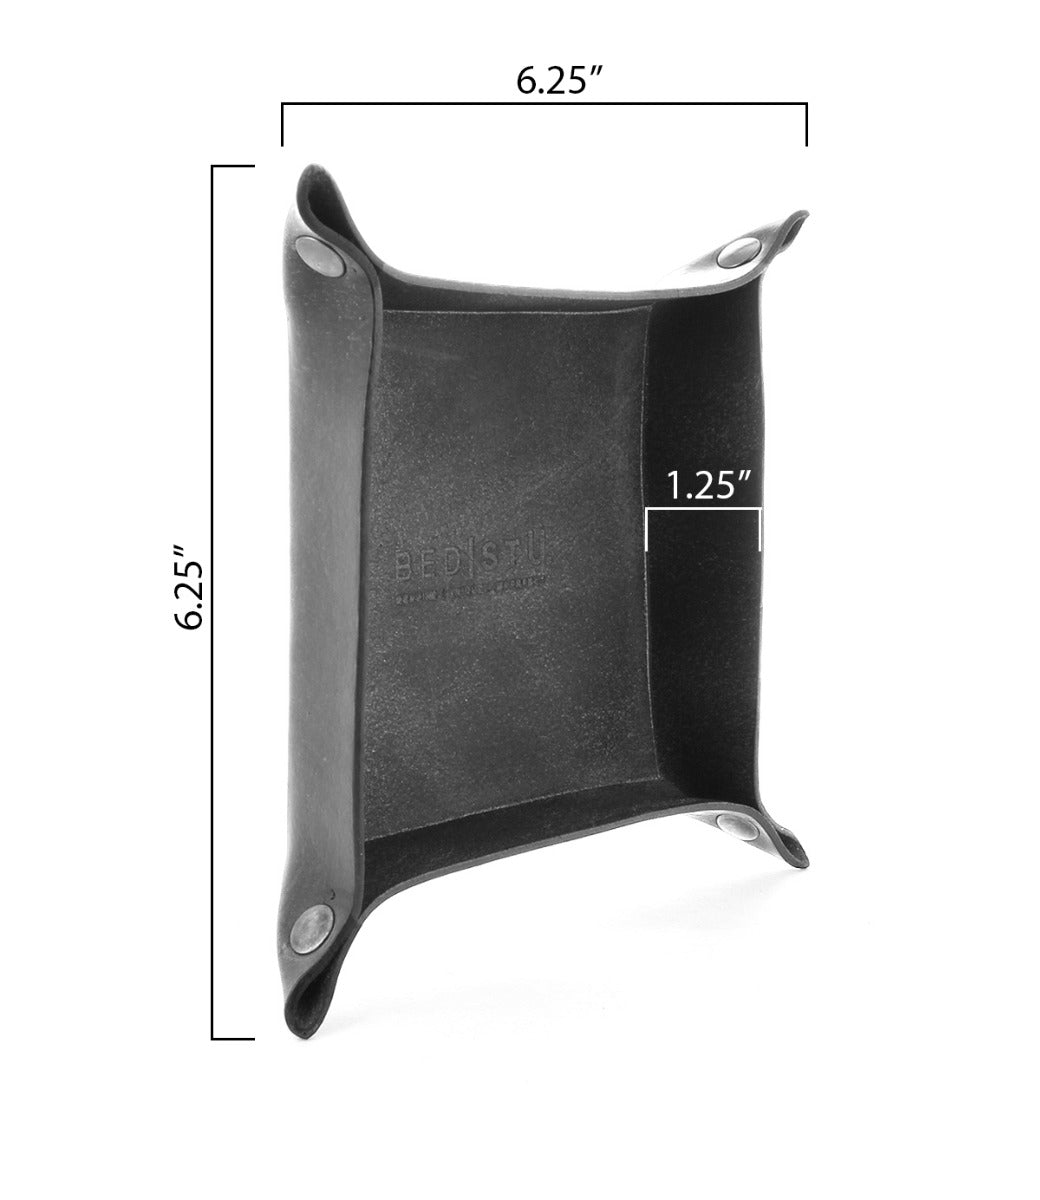 An image of the Bed Stu Expanse, a black leather tray with measurements.